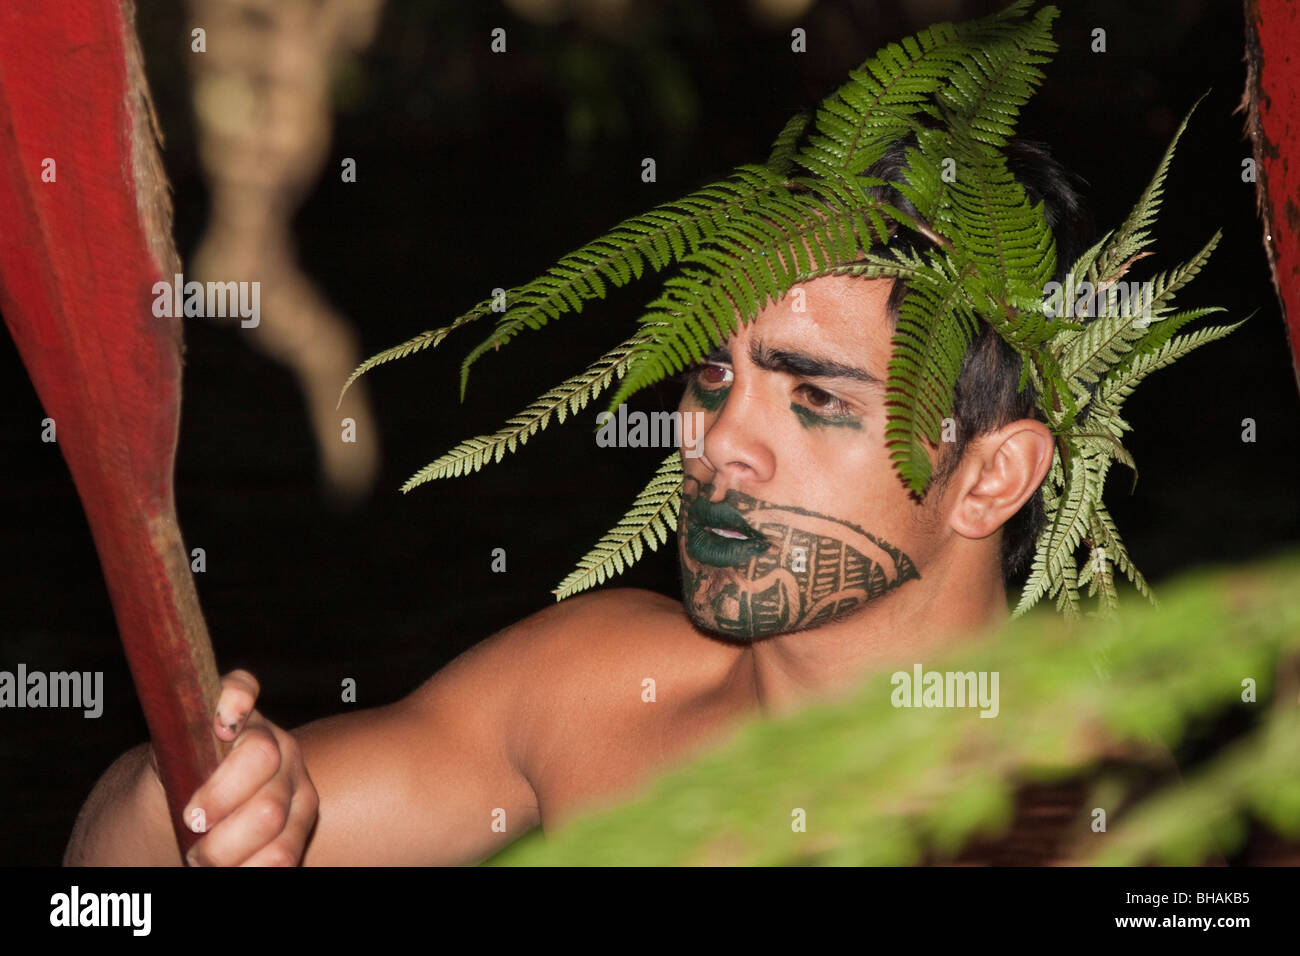 Maori oarsman wearing traditional clothing carrying an oar during cultural ceremony, Rotarua, North Island, New Zealand NZ Stock Photo